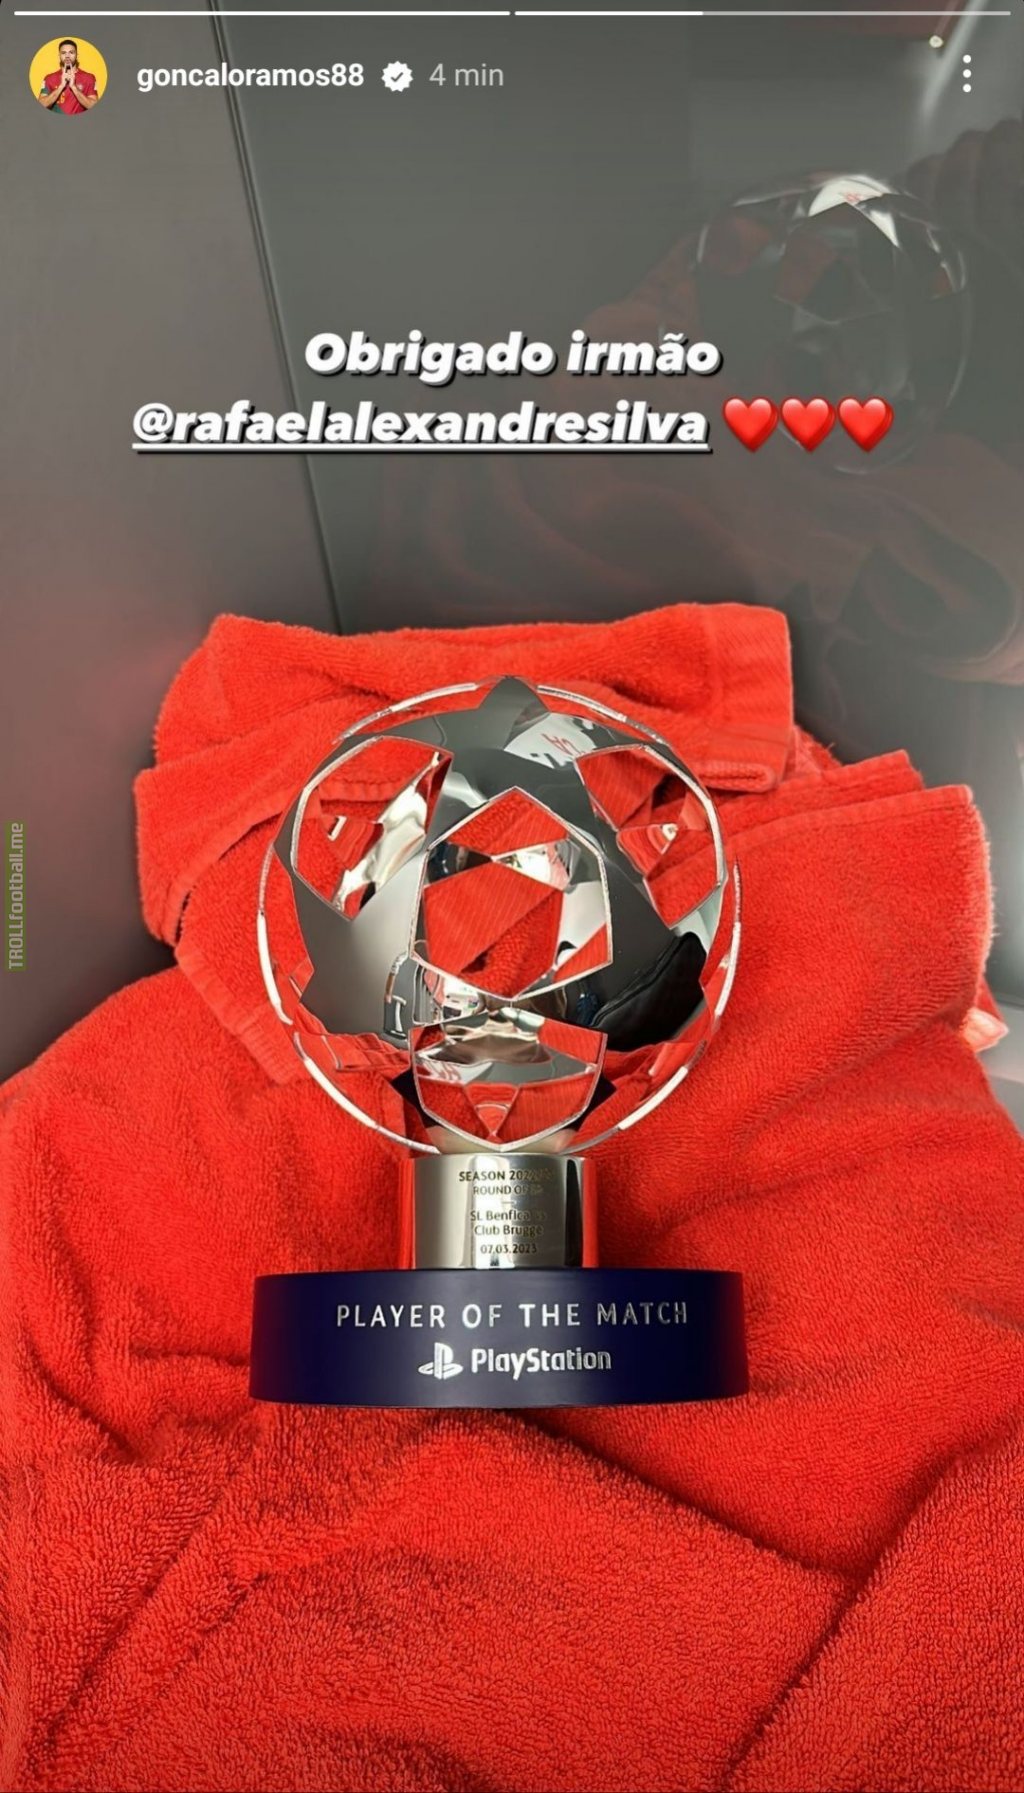 Rafa Silva offered his MOTM award to Gonçalo Ramos, who scored twice and assisted once against Club Brugge